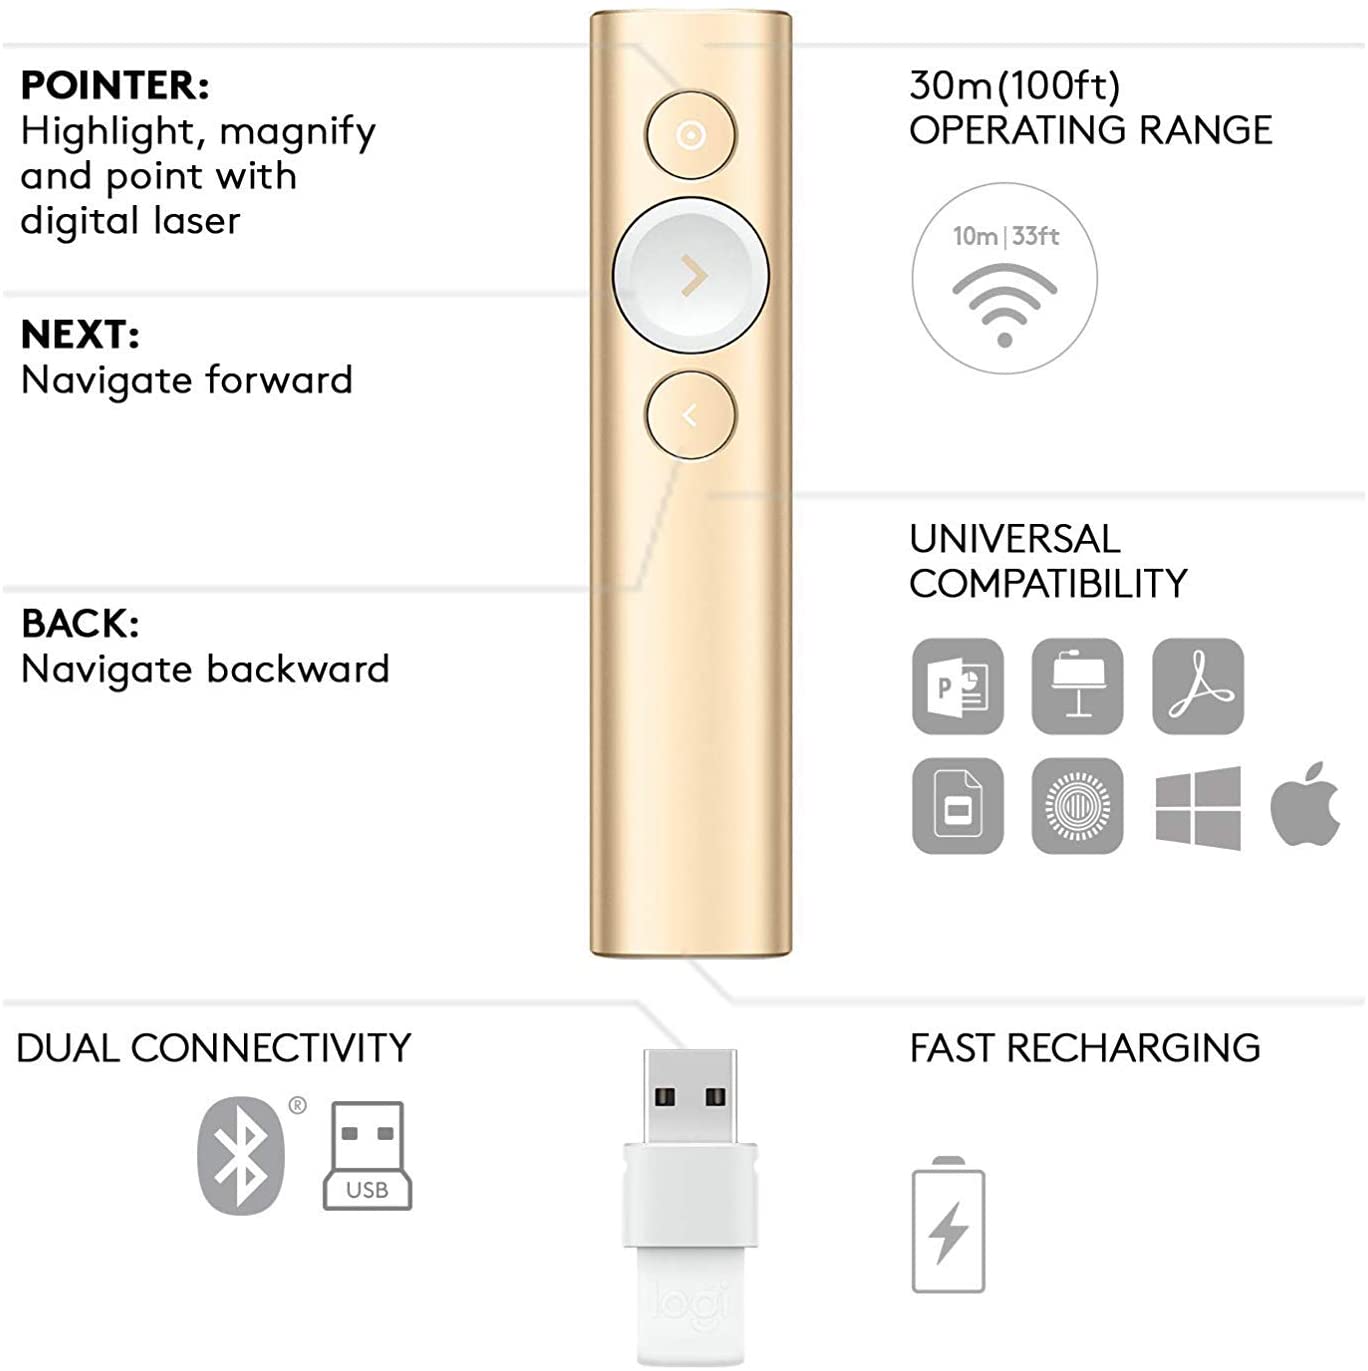 30m Range and Quick Charging Advanced Digital Highlighting with Bluetooth Universal Compatibility Logitech Spotlight Presentation Remote Gold 